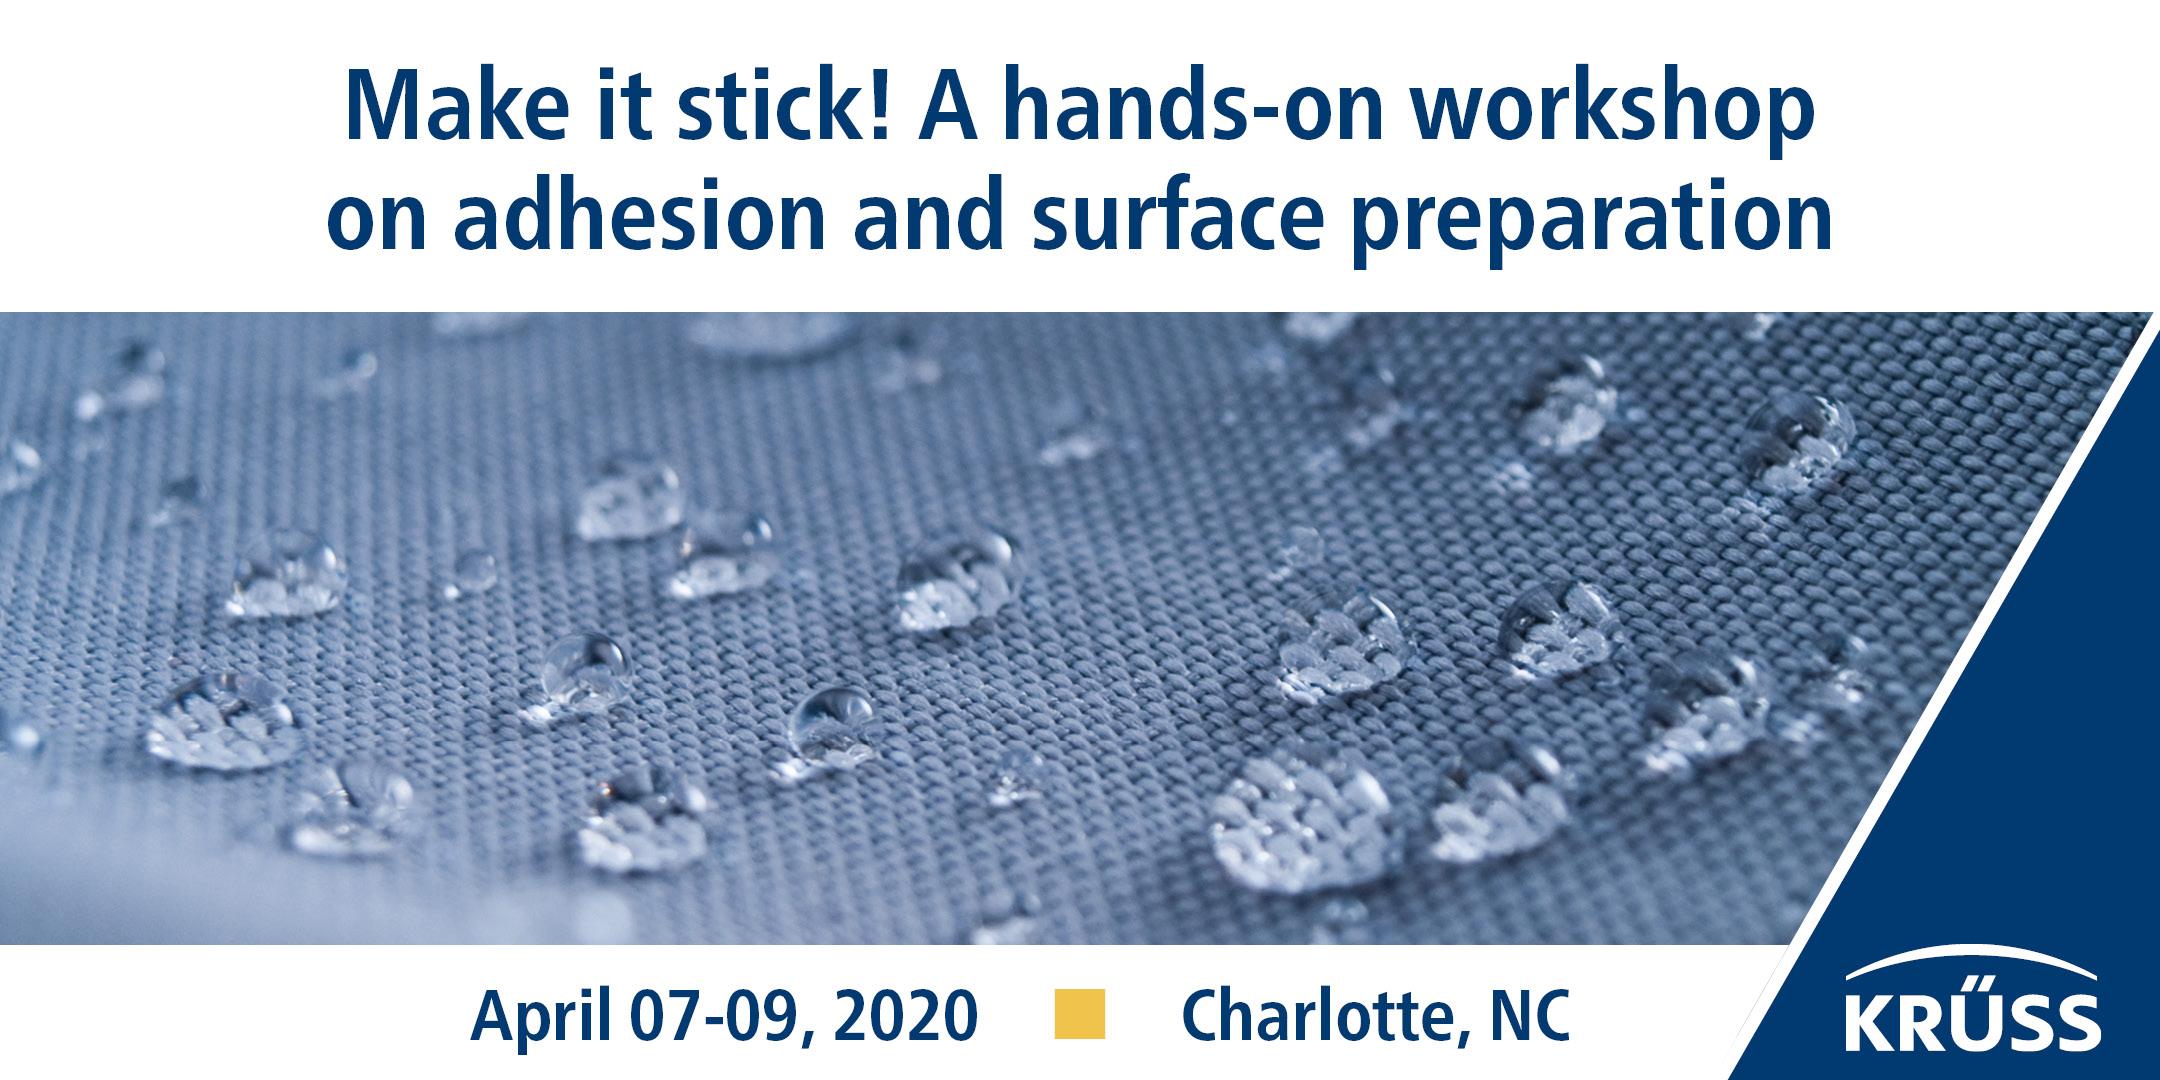 Make it stick! A hands-on workshop on adhesion and surface preparation